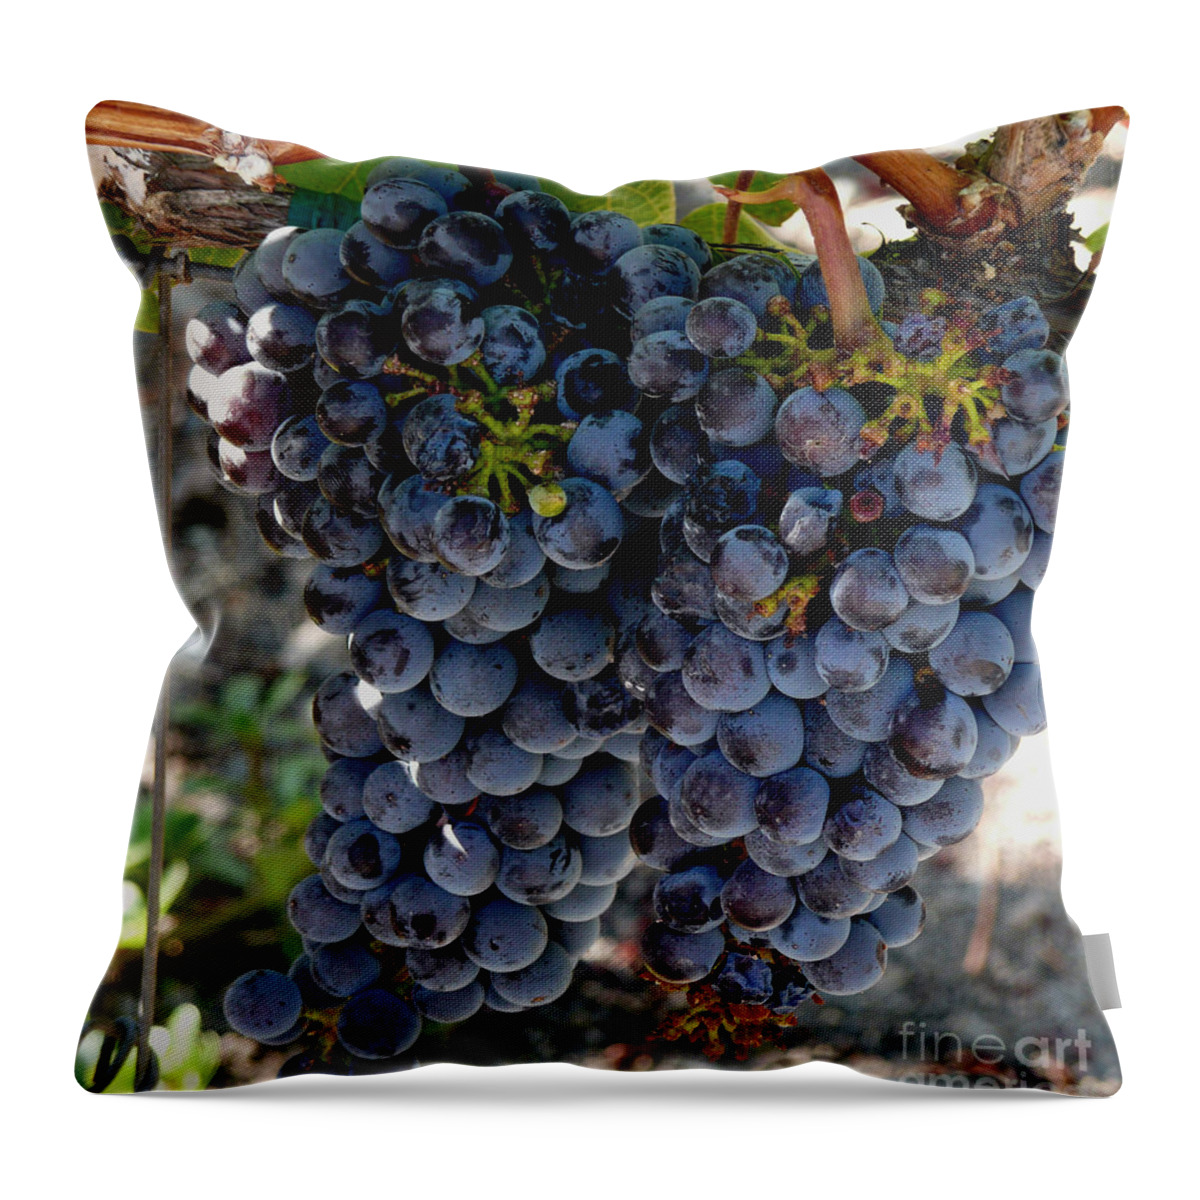 Grapes Throw Pillow featuring the photograph The Concord by Richard Ortolano